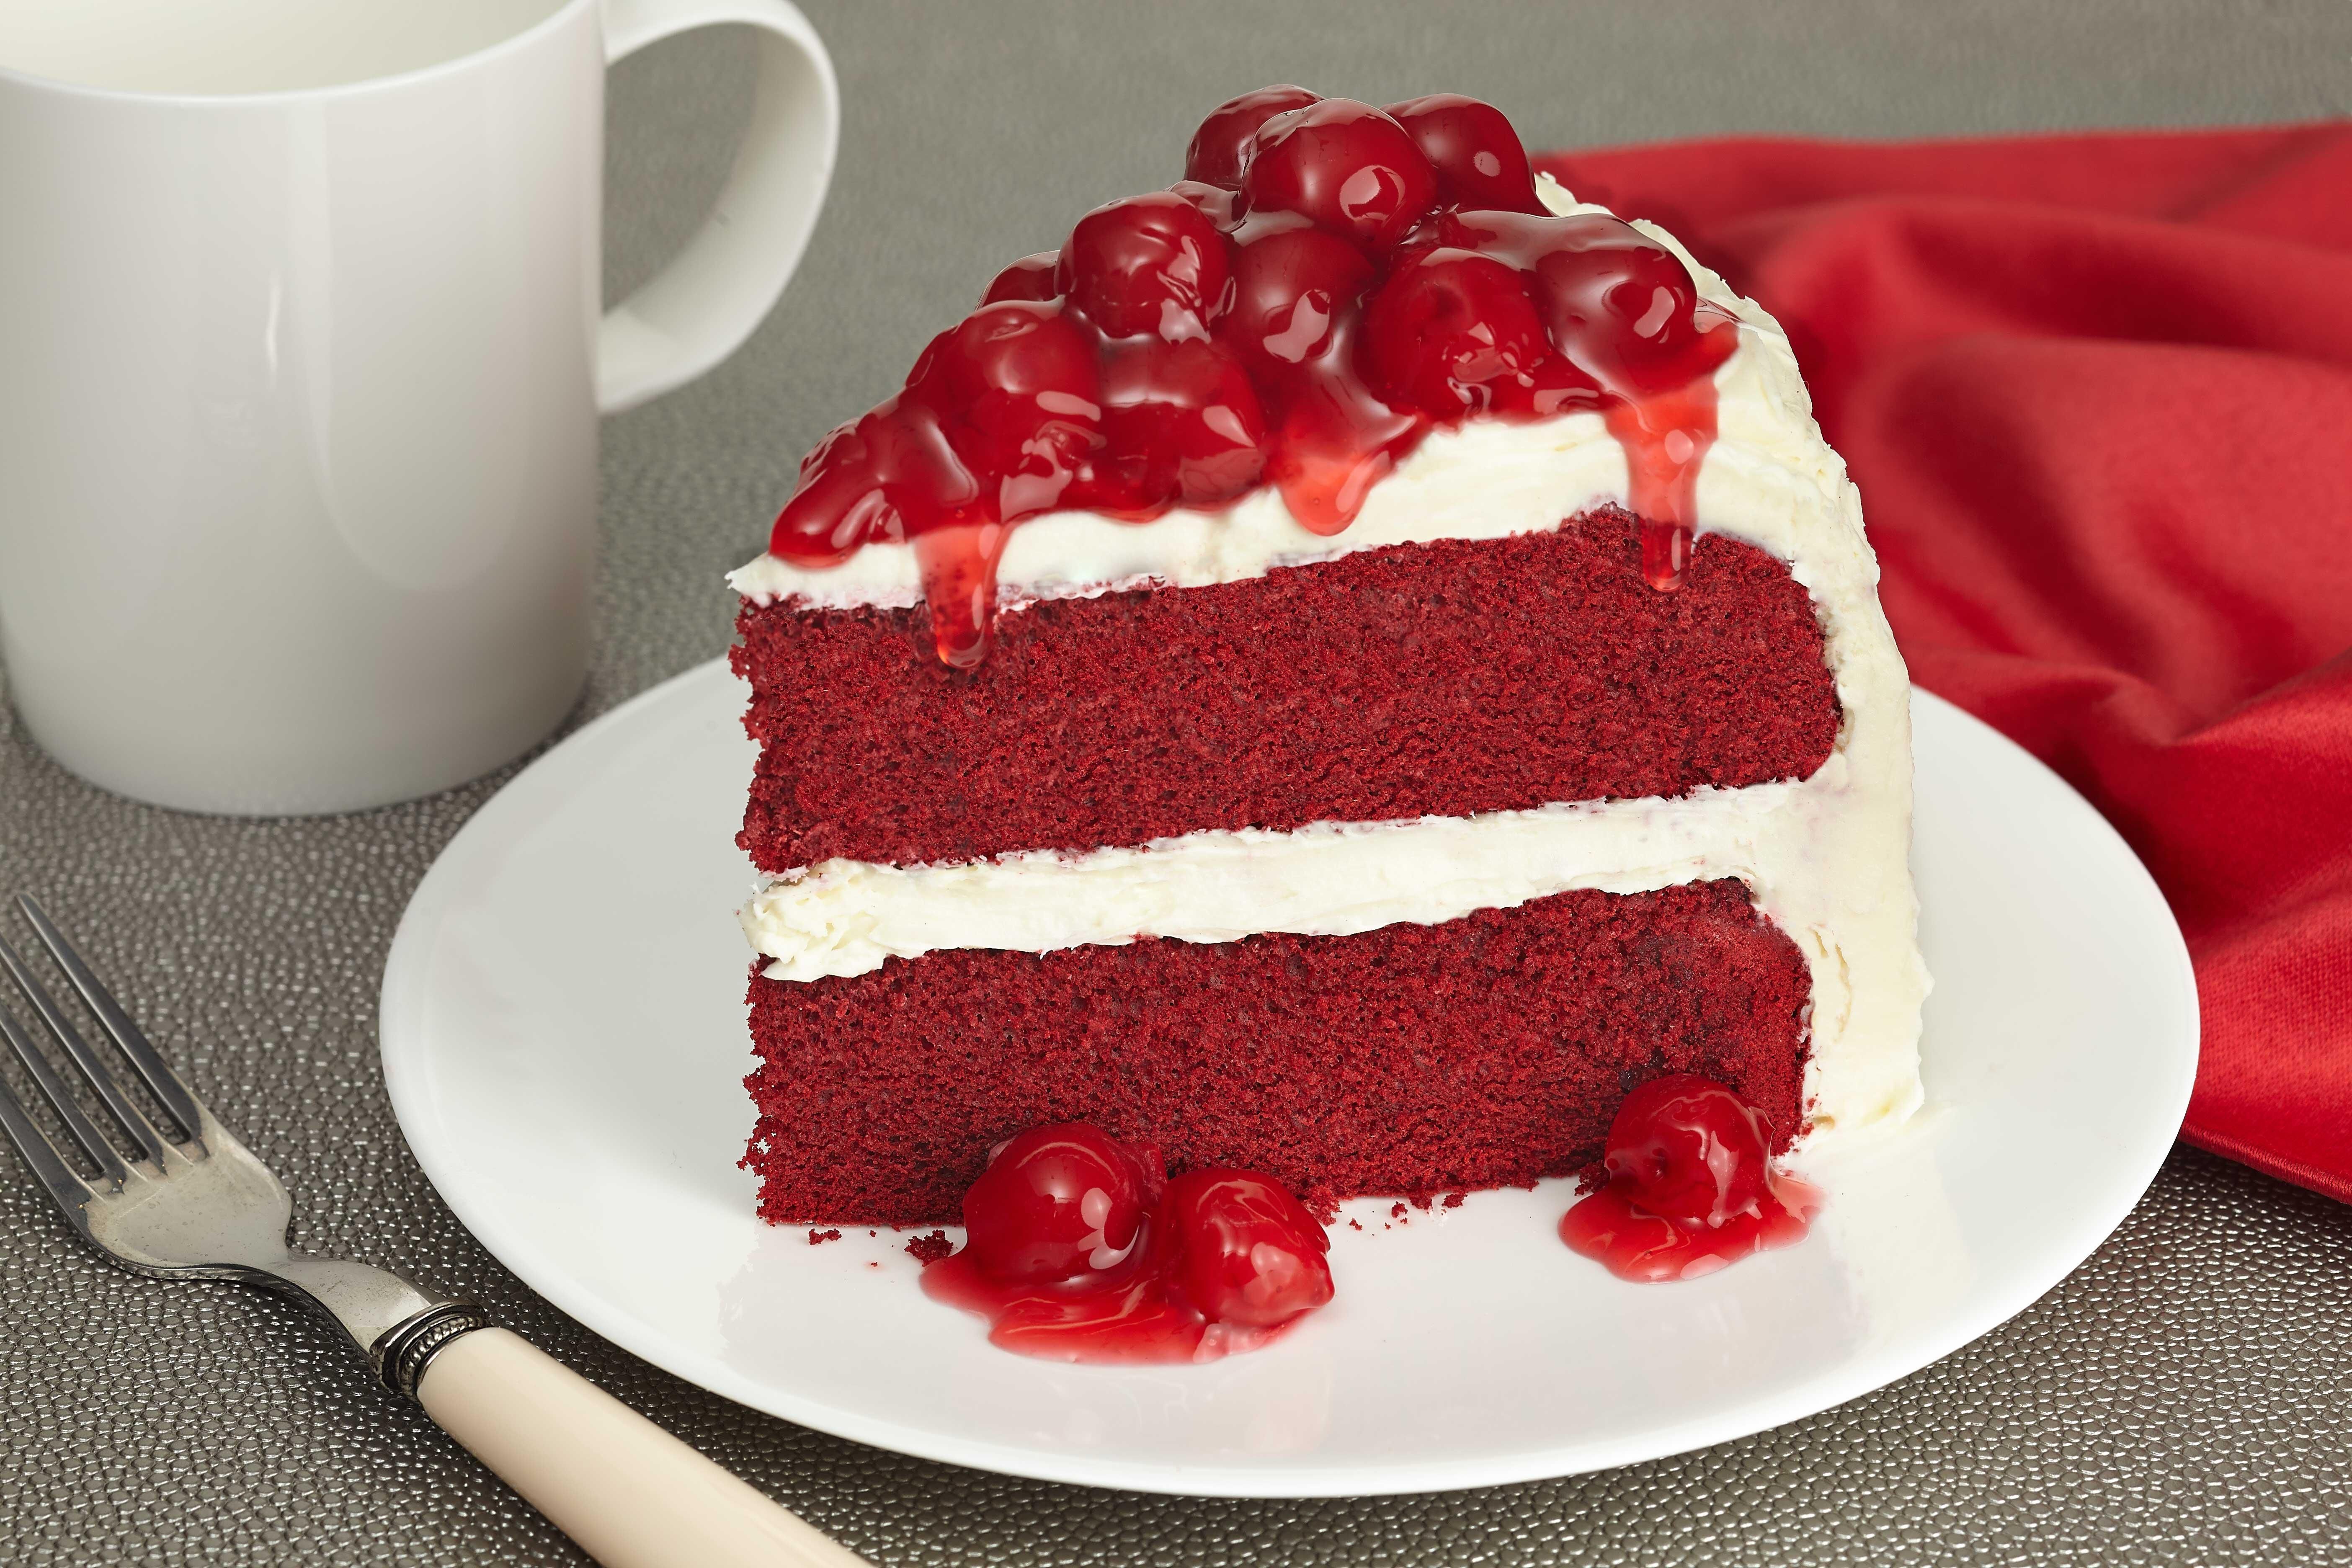 Free Wallpaper Page Wallpaper Page. Red velvet cake, Red velvet cake mix, Cake mix